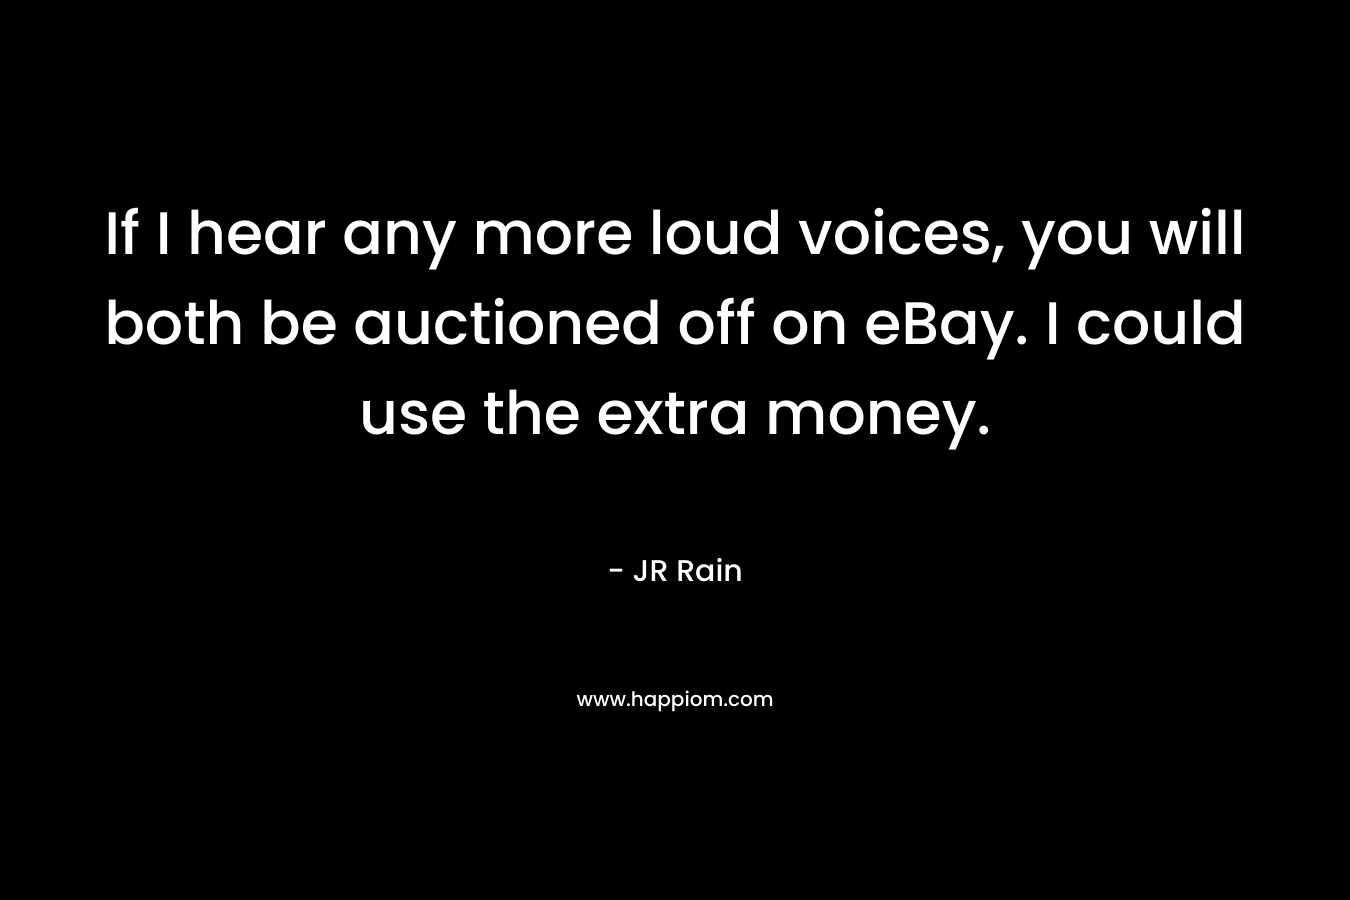 If I hear any more loud voices, you will both be auctioned off on eBay. I could use the extra money. – JR Rain